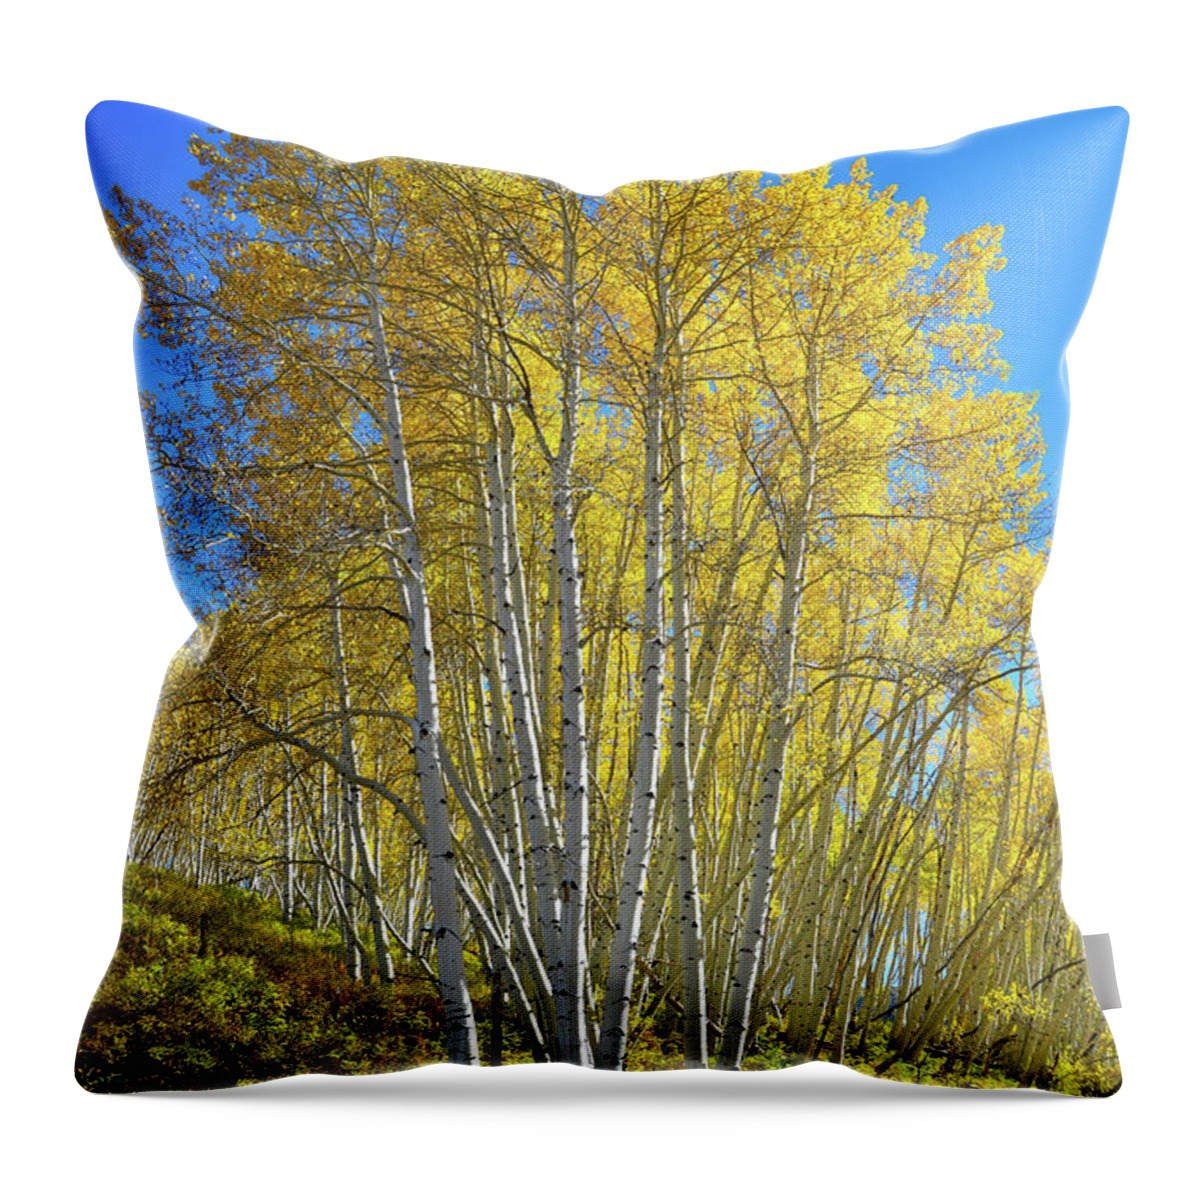 Colorado Throw Pillow featuring the photograph Aspen Lane by Ray Mathis